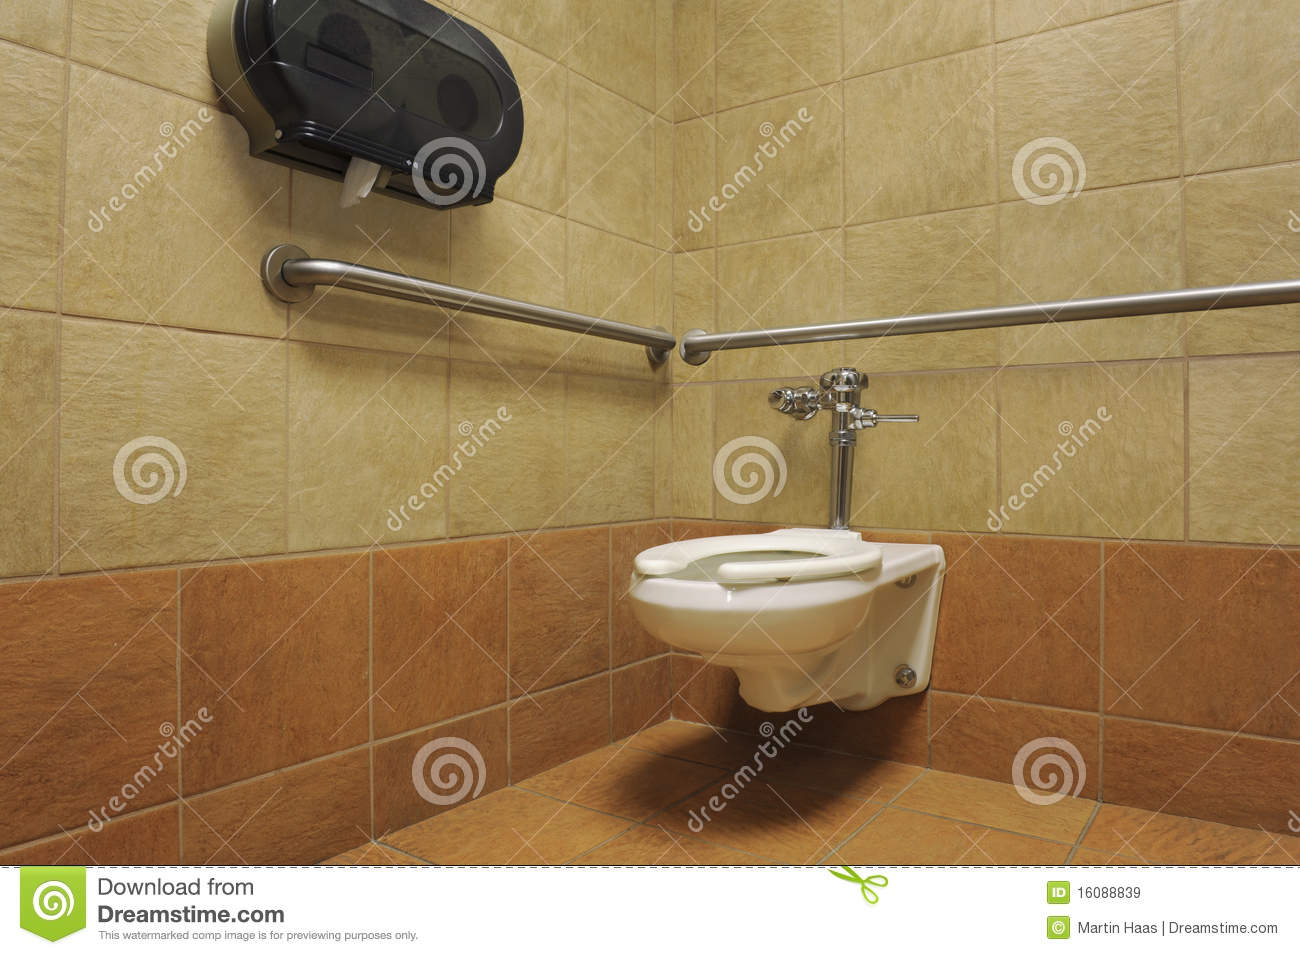 Toilet In A Public Restroom Stall Royalty Free Stock Images   Image